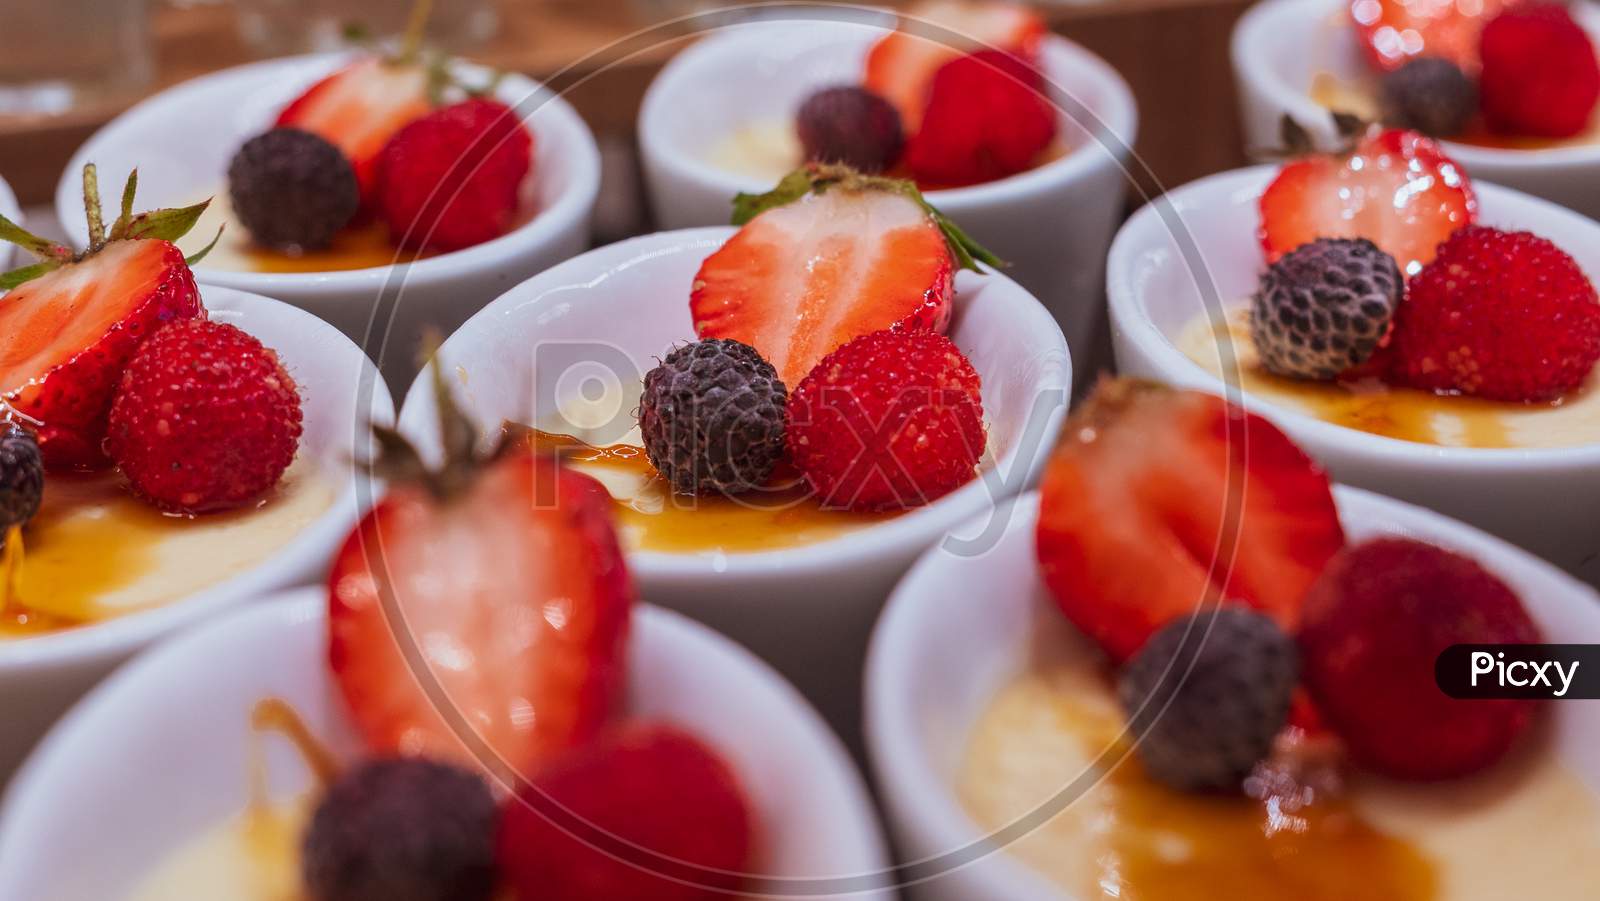 Strawberry Dessert In An Oval Shaped Bowl